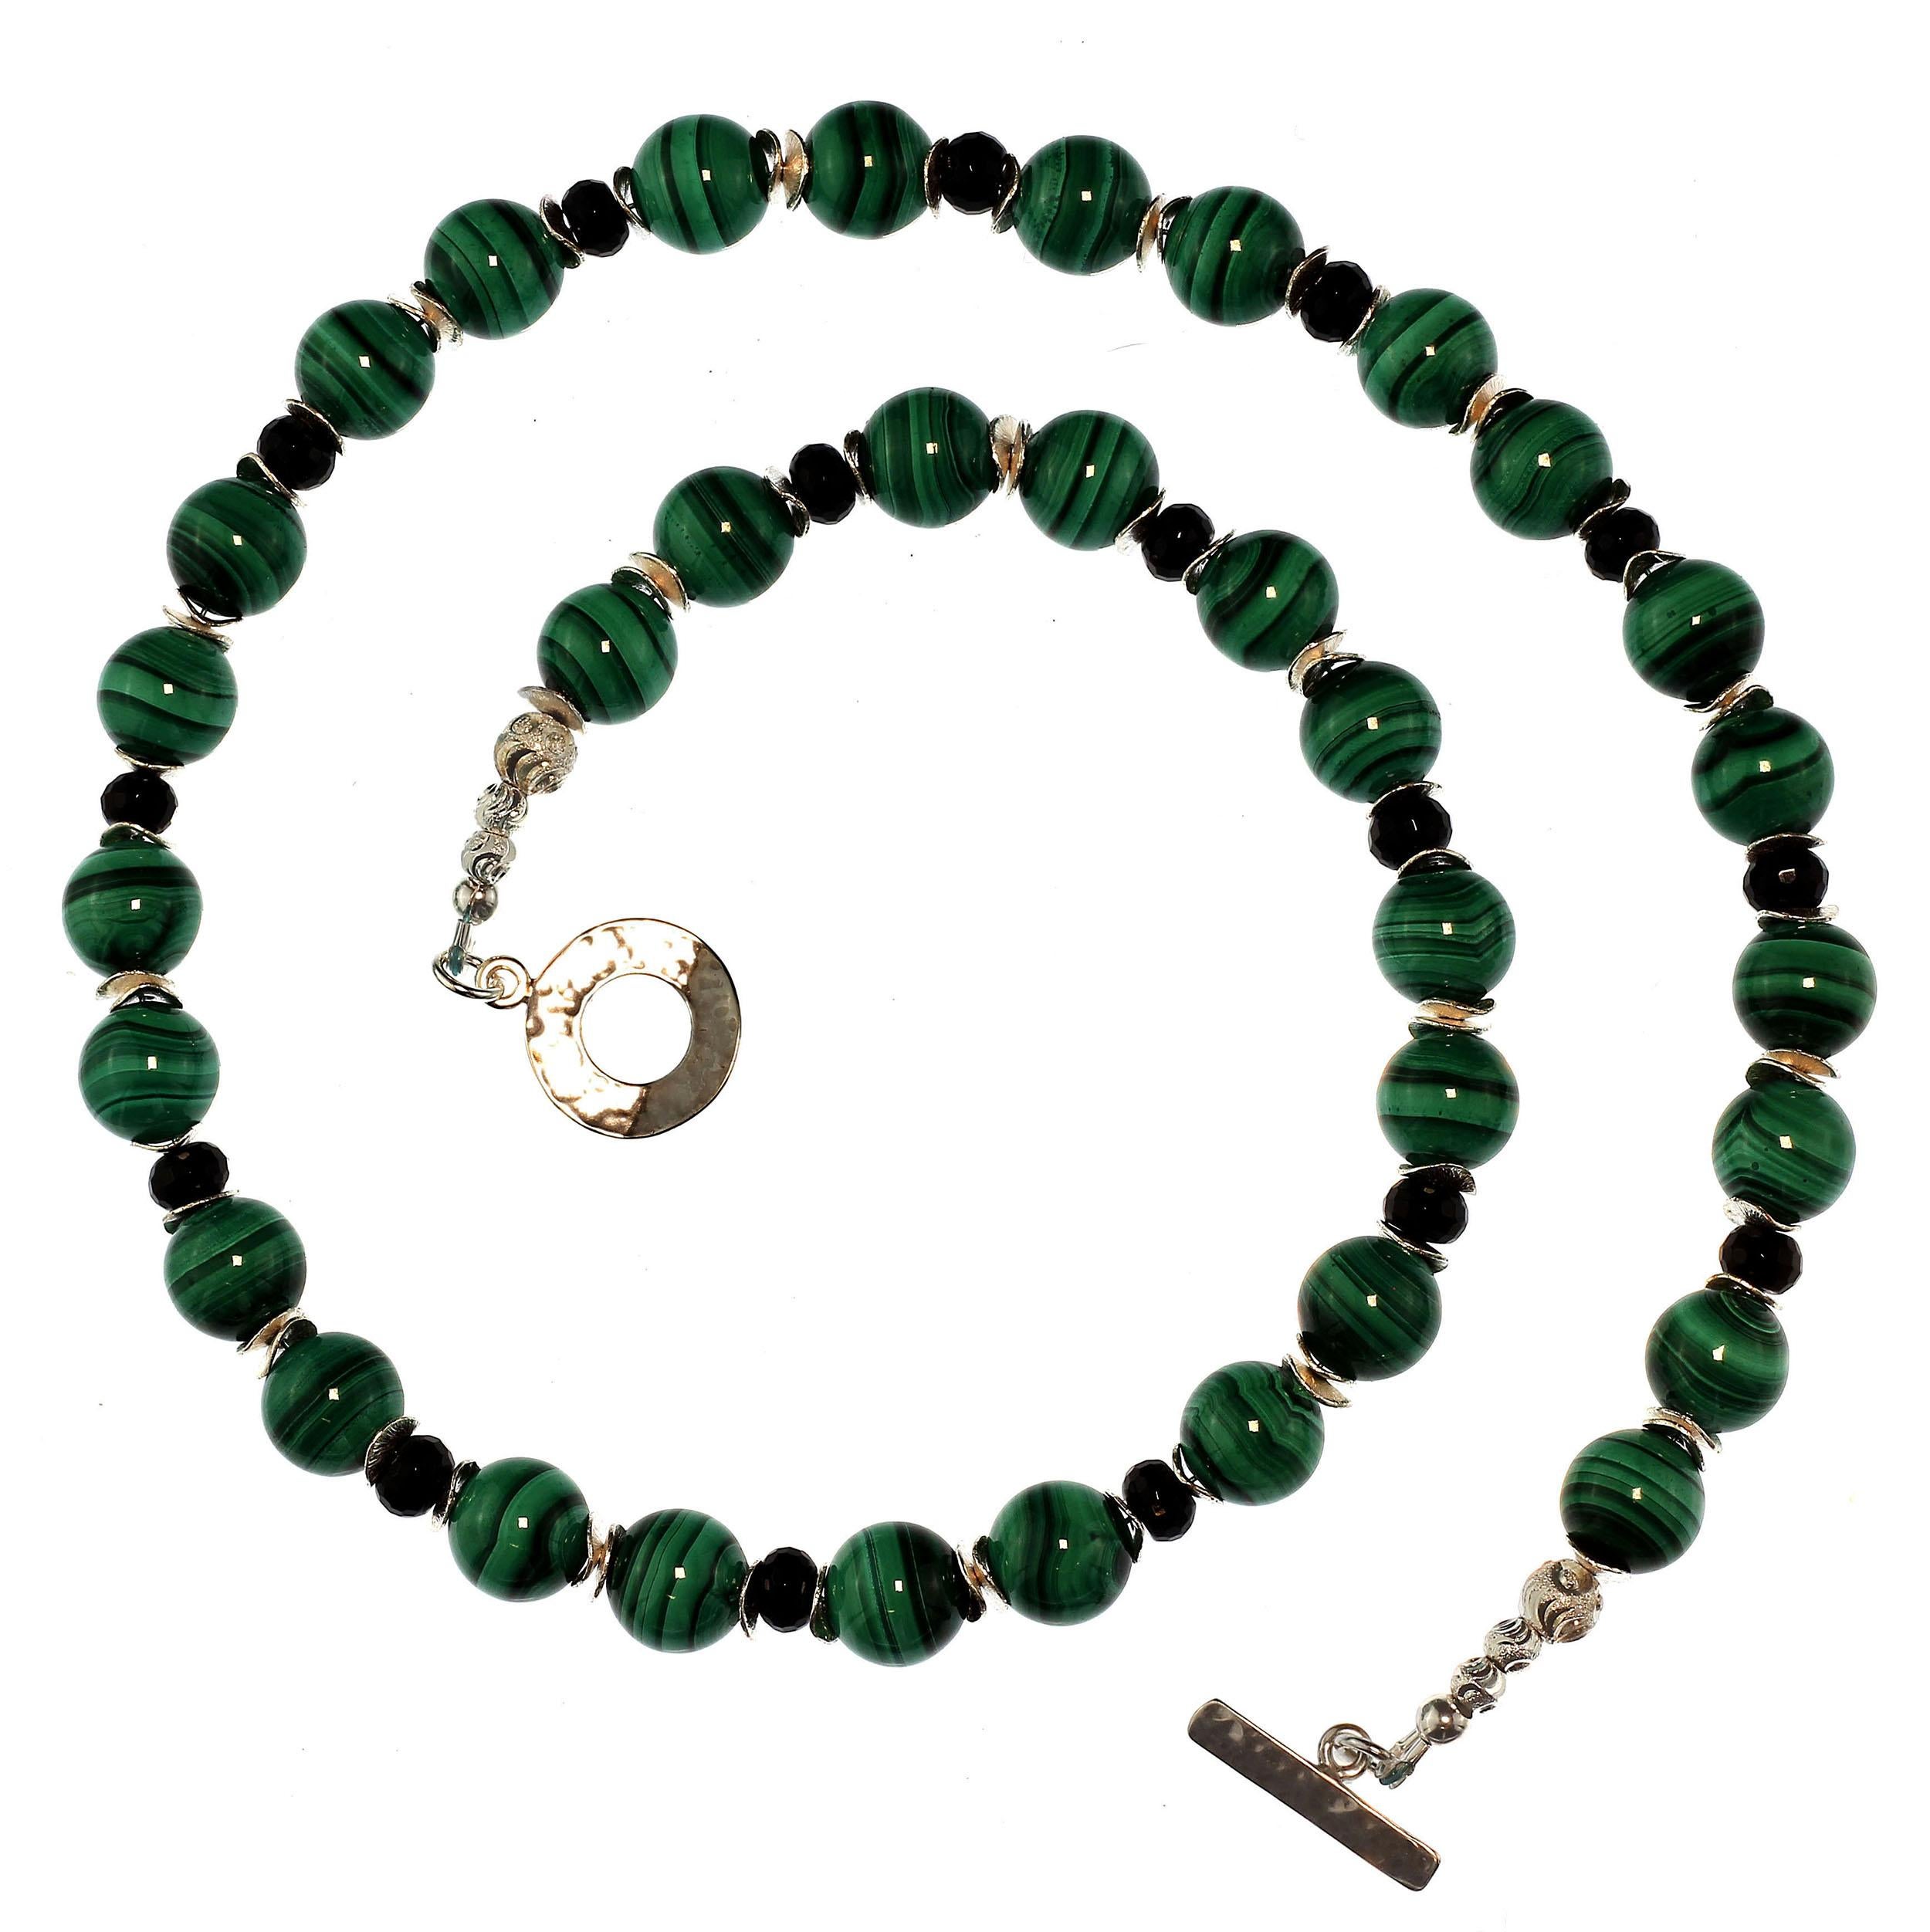 Malachite and Black Onyx necklace with Silver Accents 2